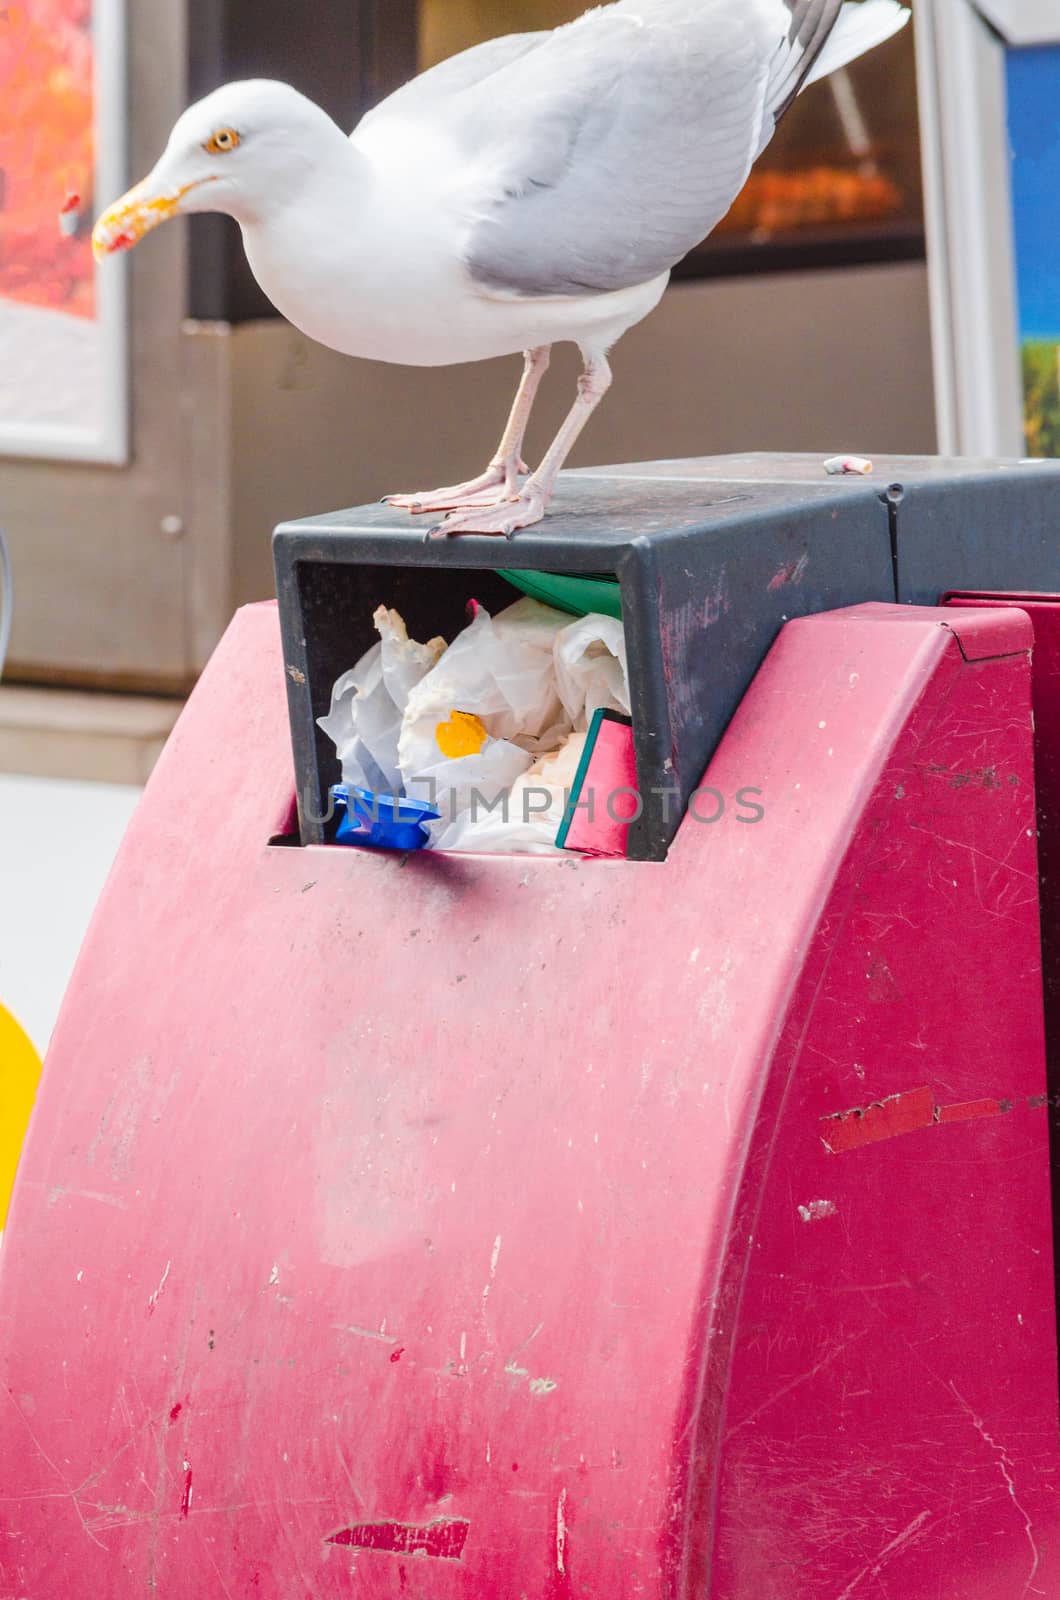 Gull when searching for nesting material and food in a red trash can.